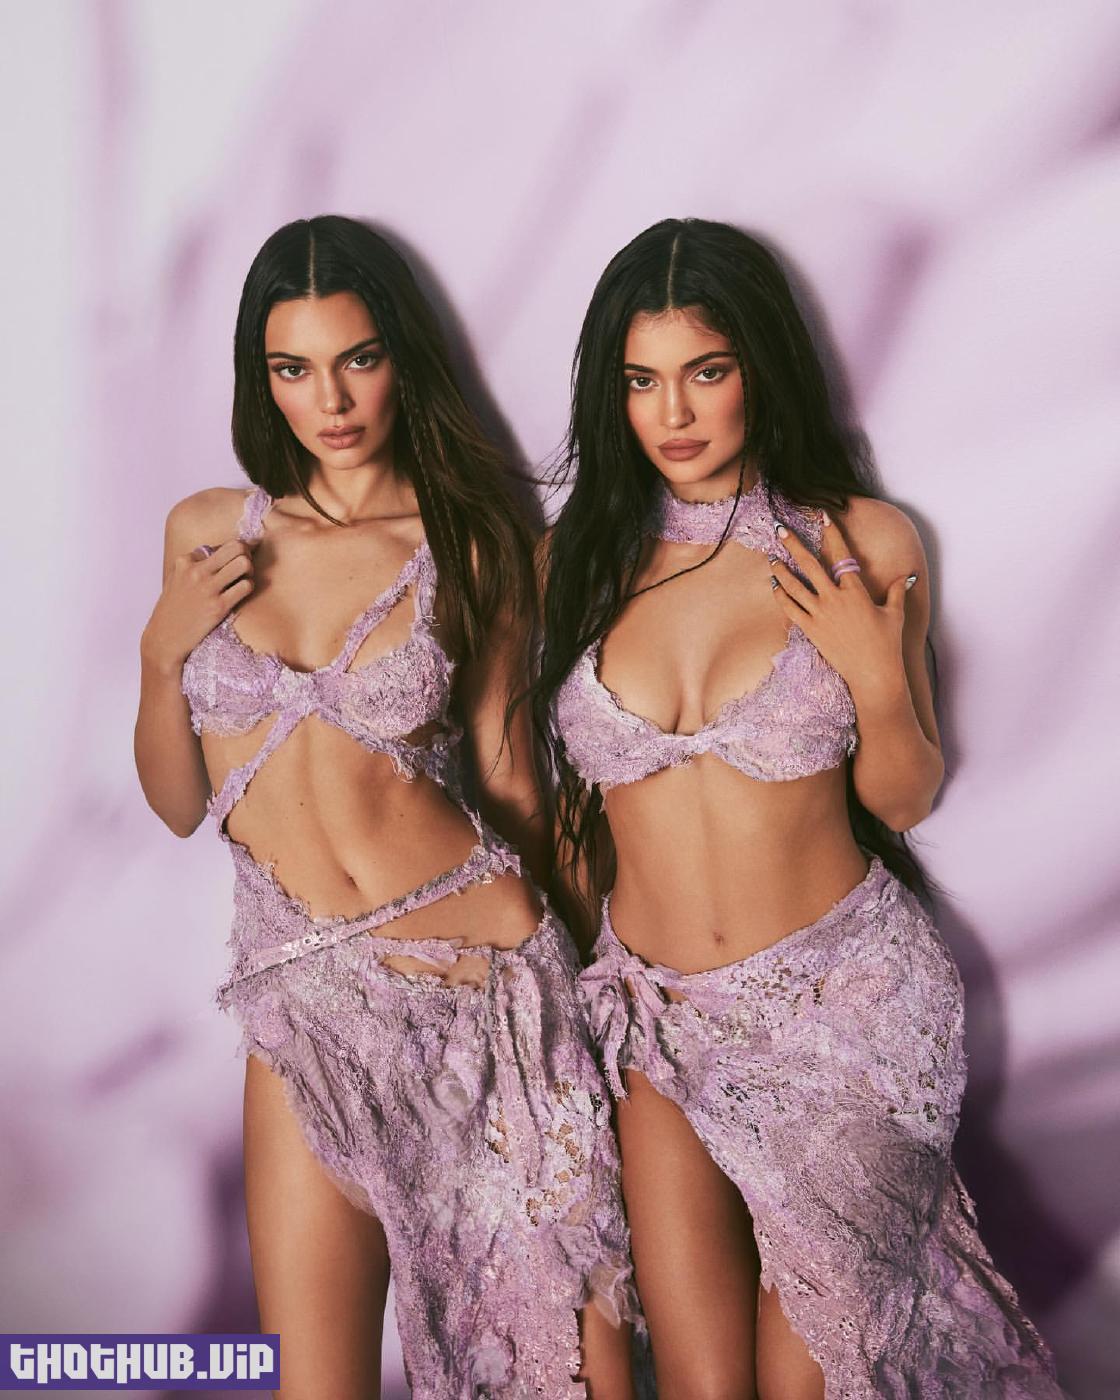 1662431295 861 Kendall And Kylie Jenner Modeling Photoshoot Set Leaked